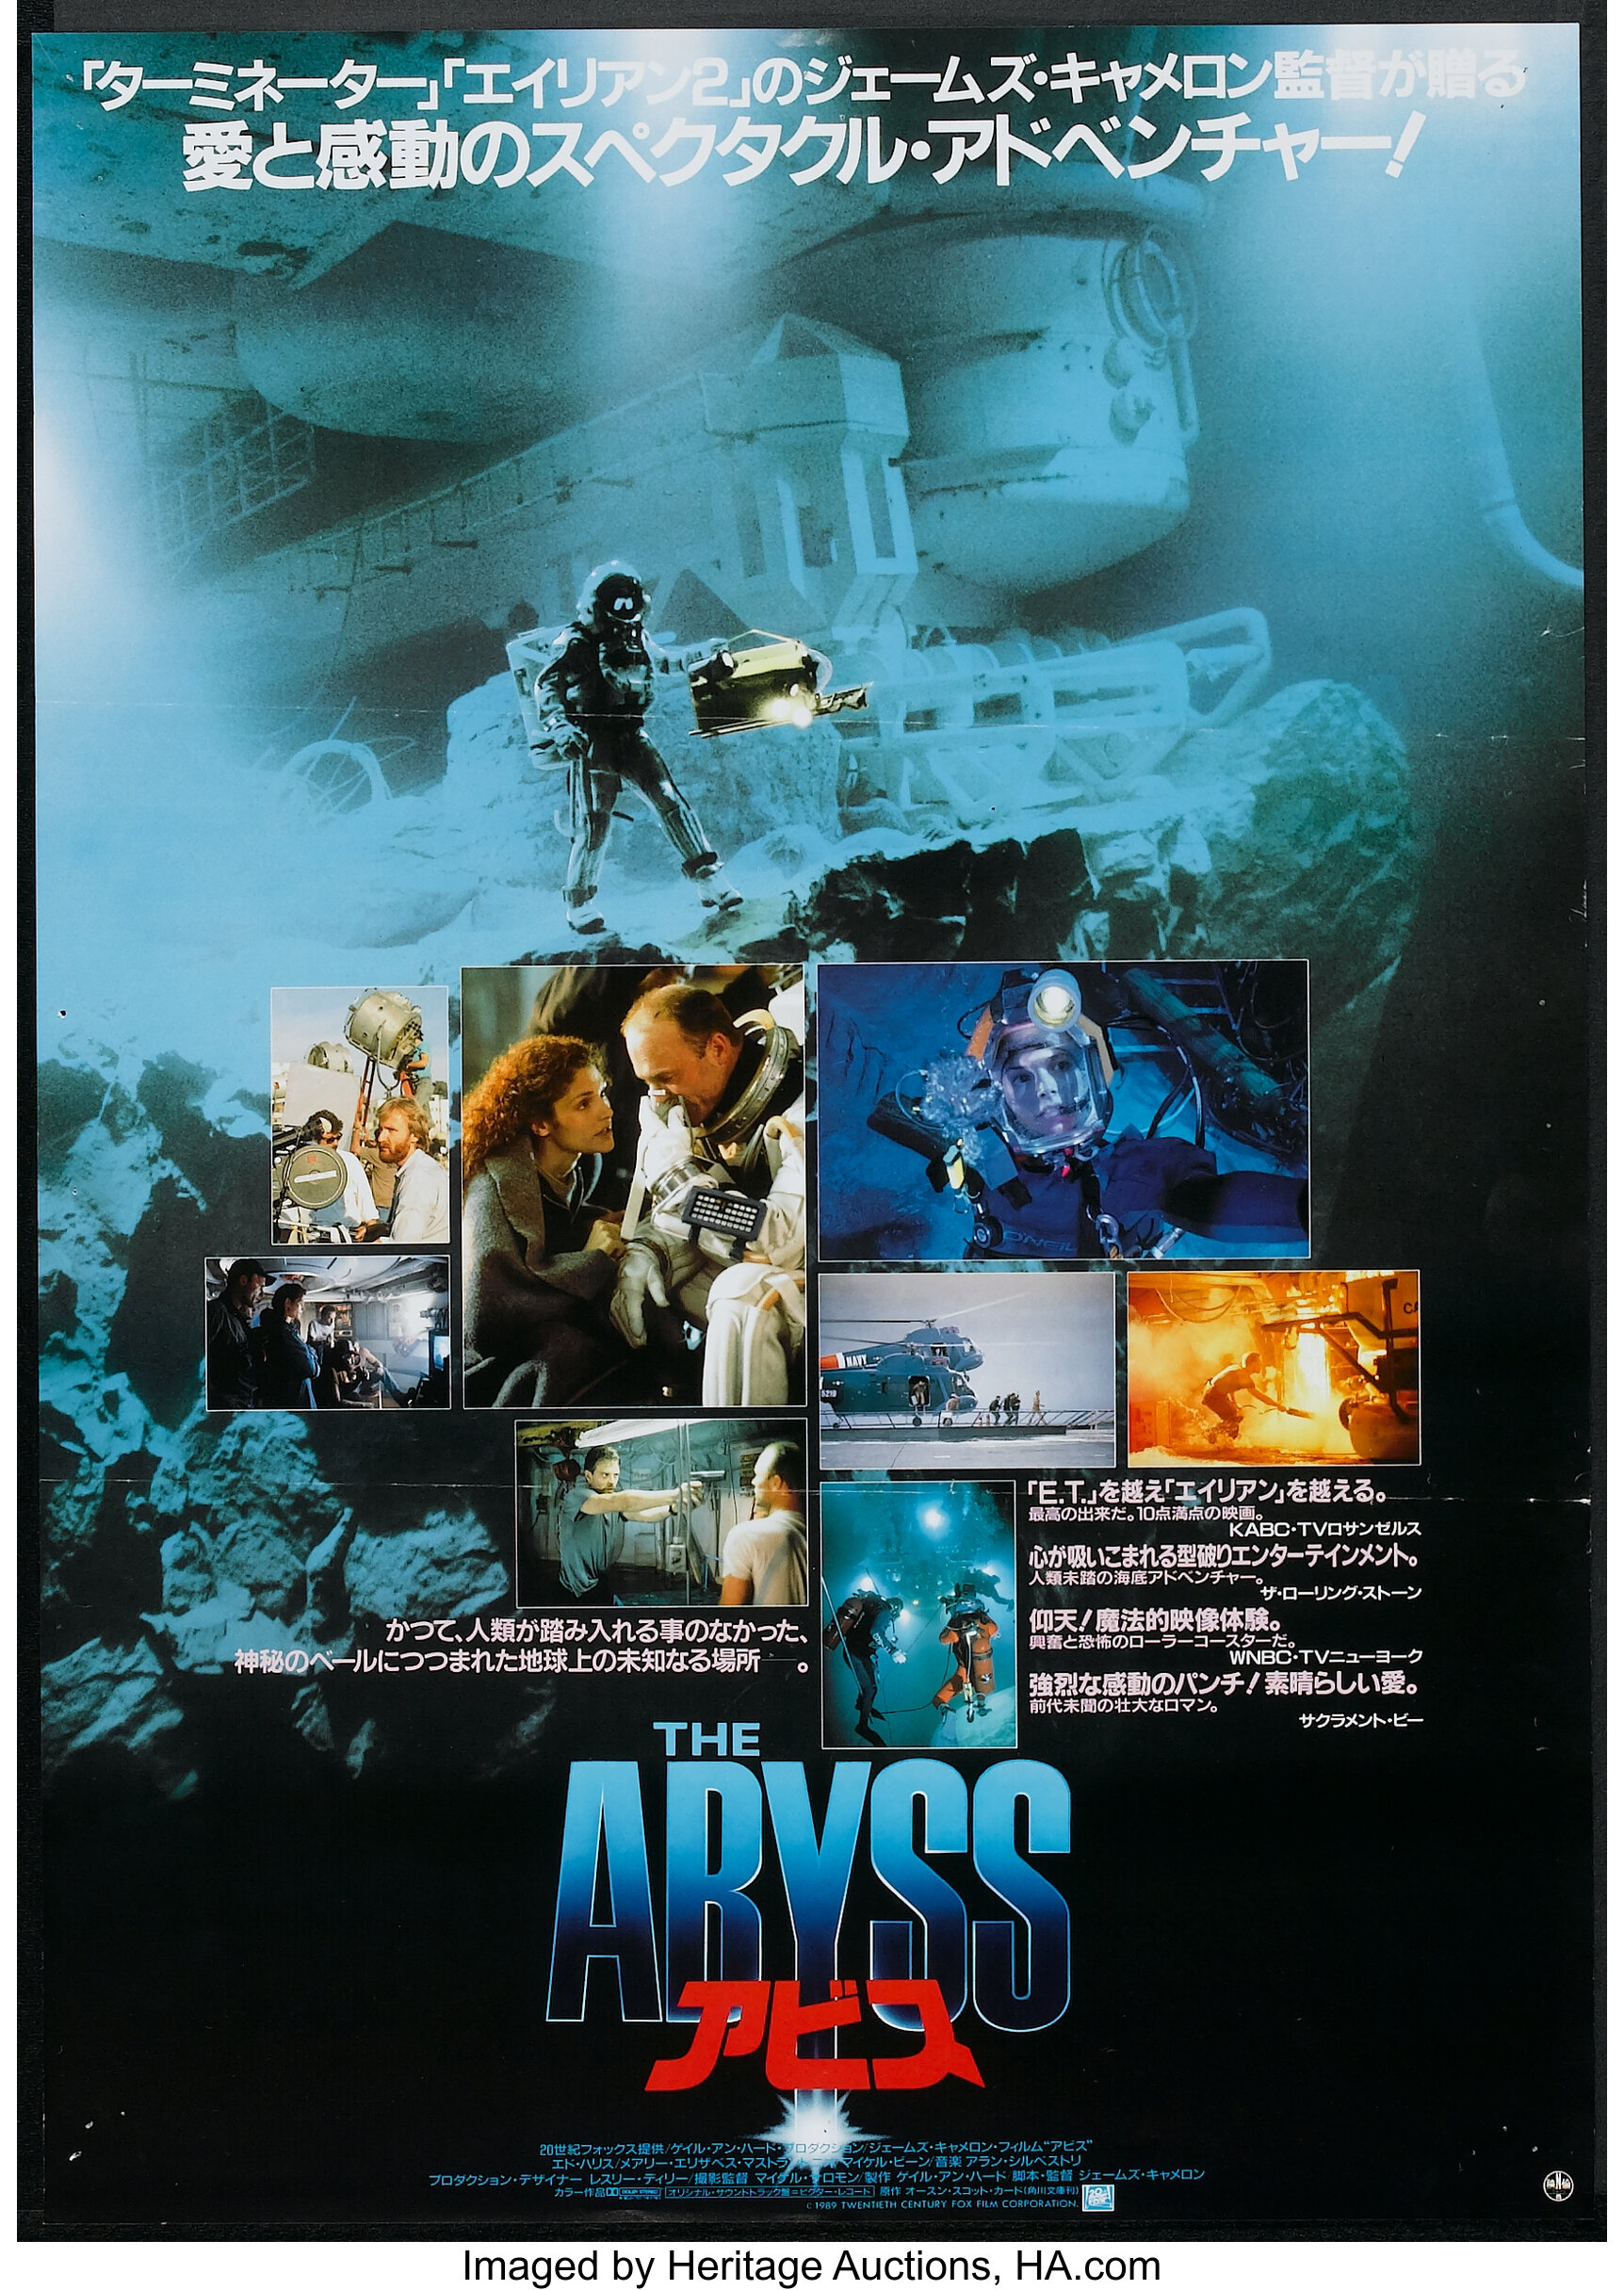 The Abyss th Century Fox 19 Japanese B2 25 X 28 5 Lot 9 Heritage Auctions